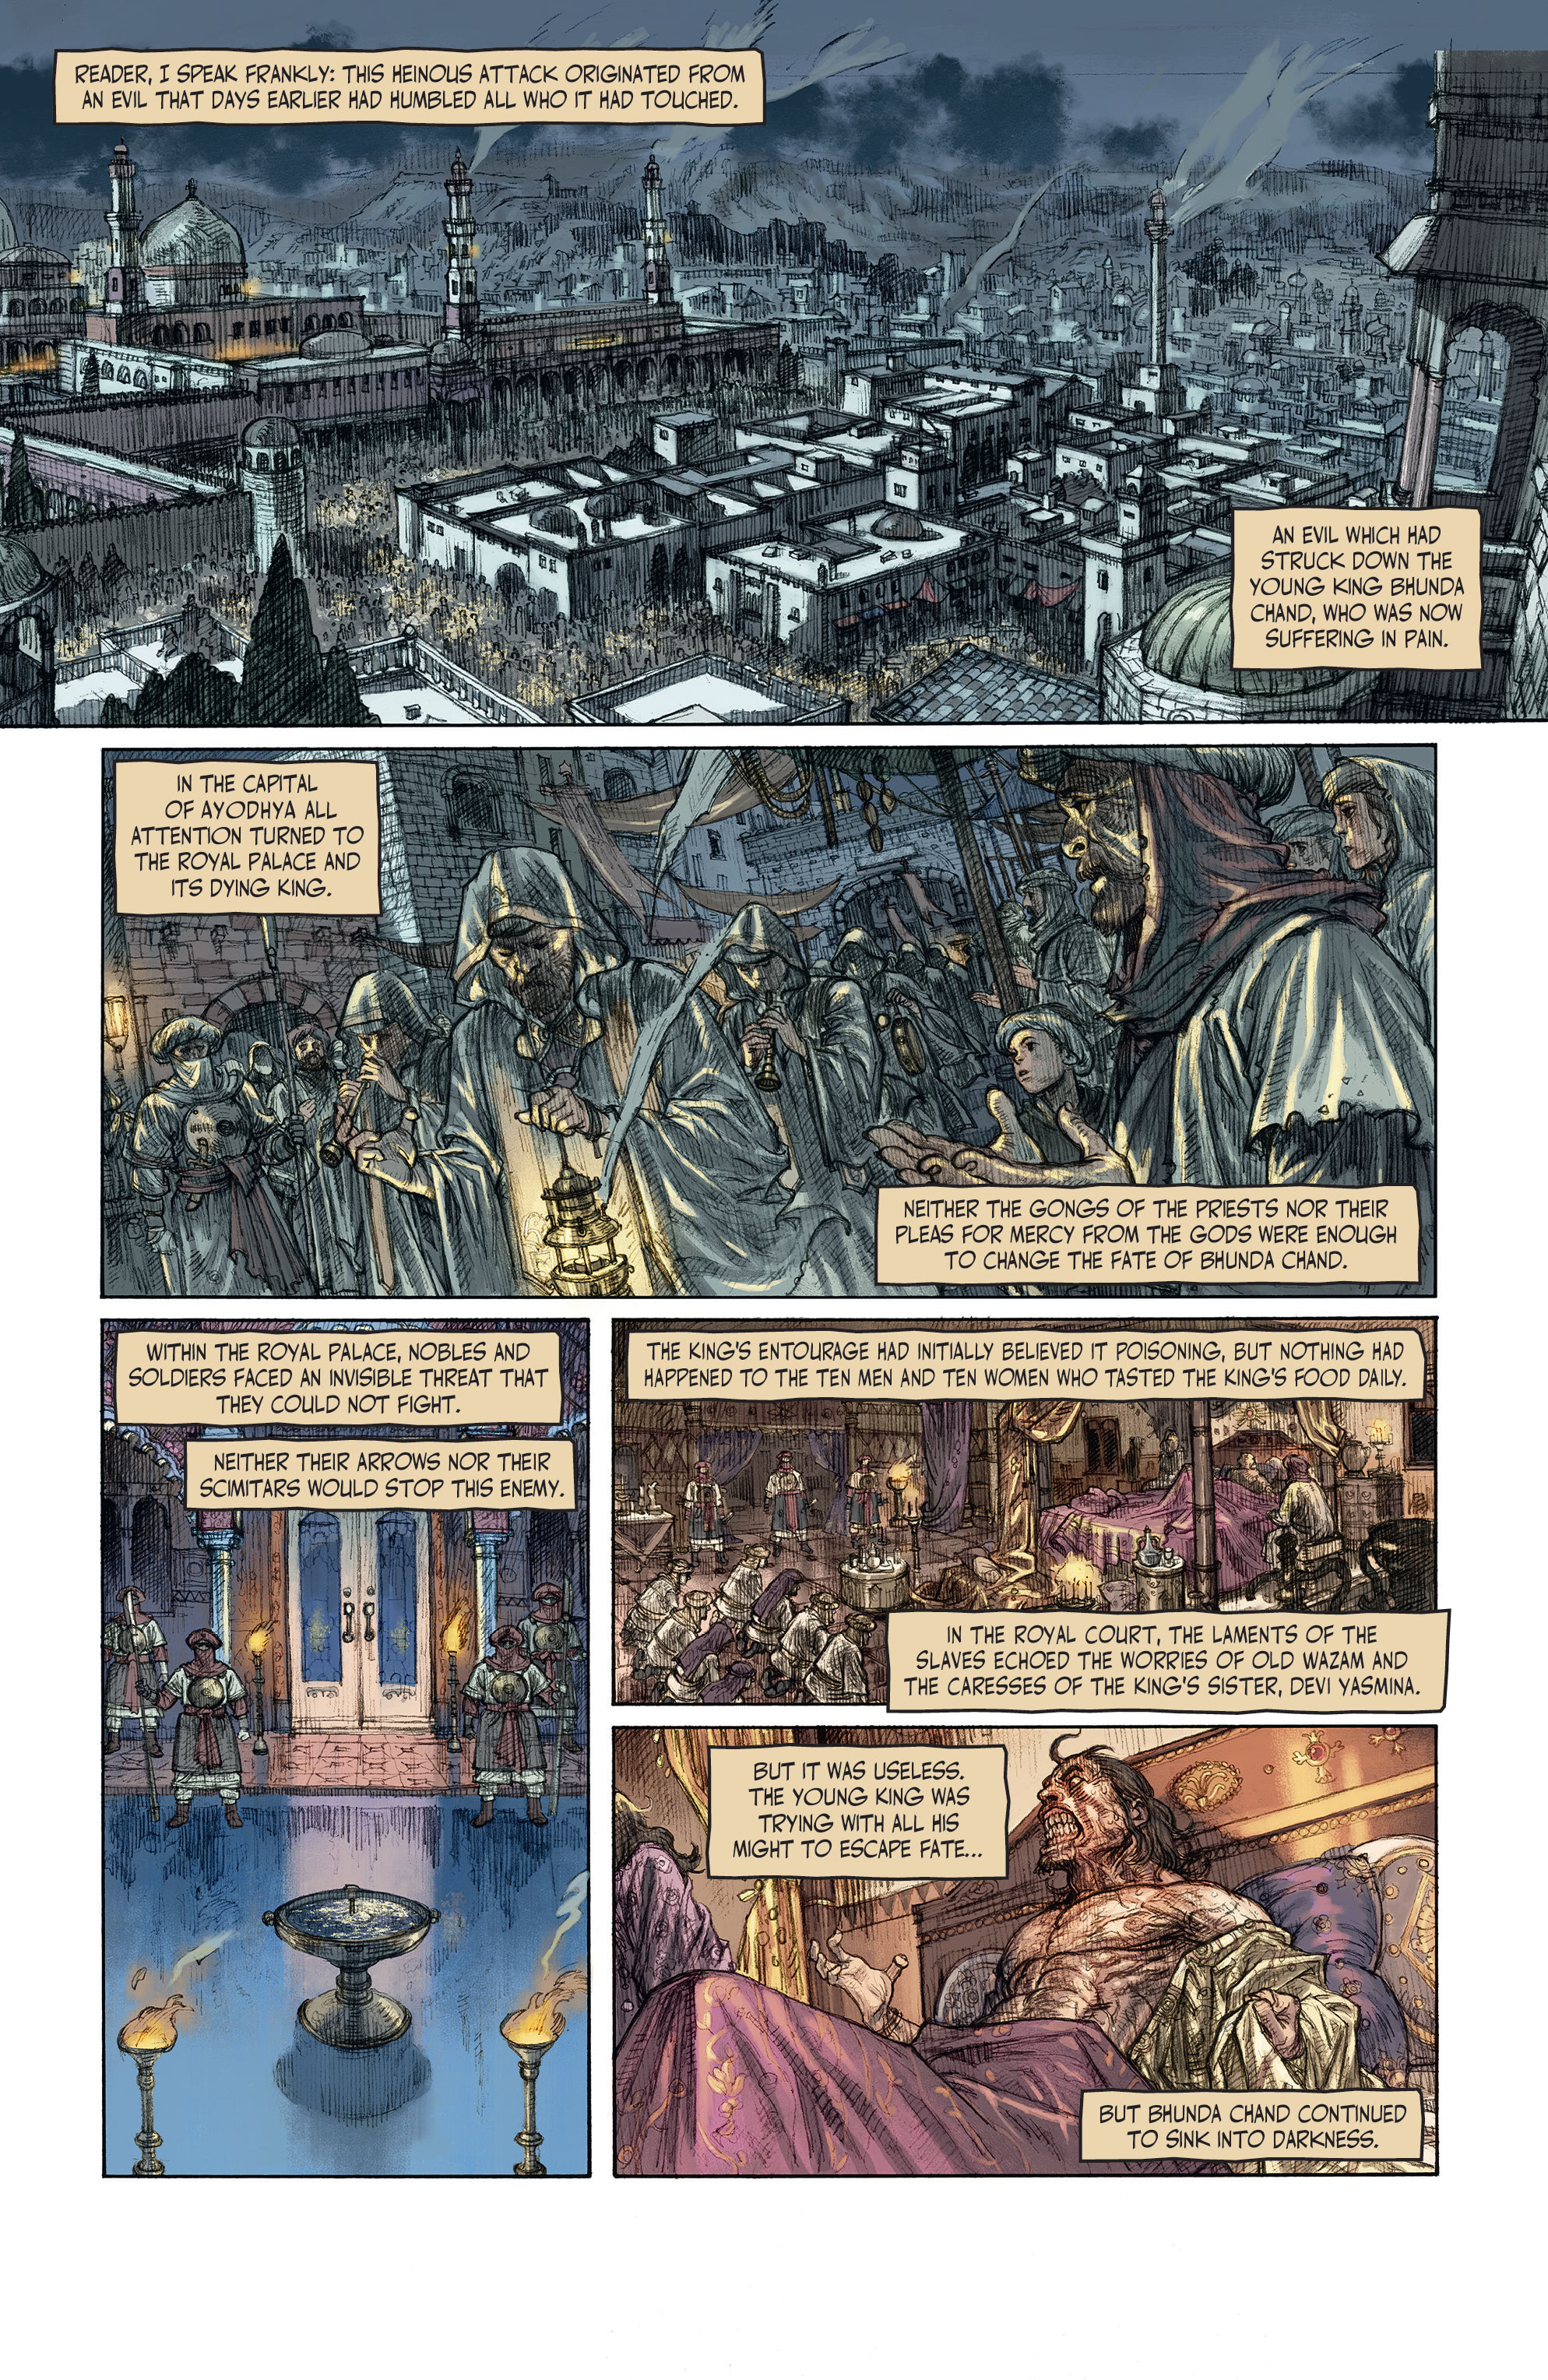 The Cimmerian: People of the Black Circle (2020-): Chapter 1 - Page 6